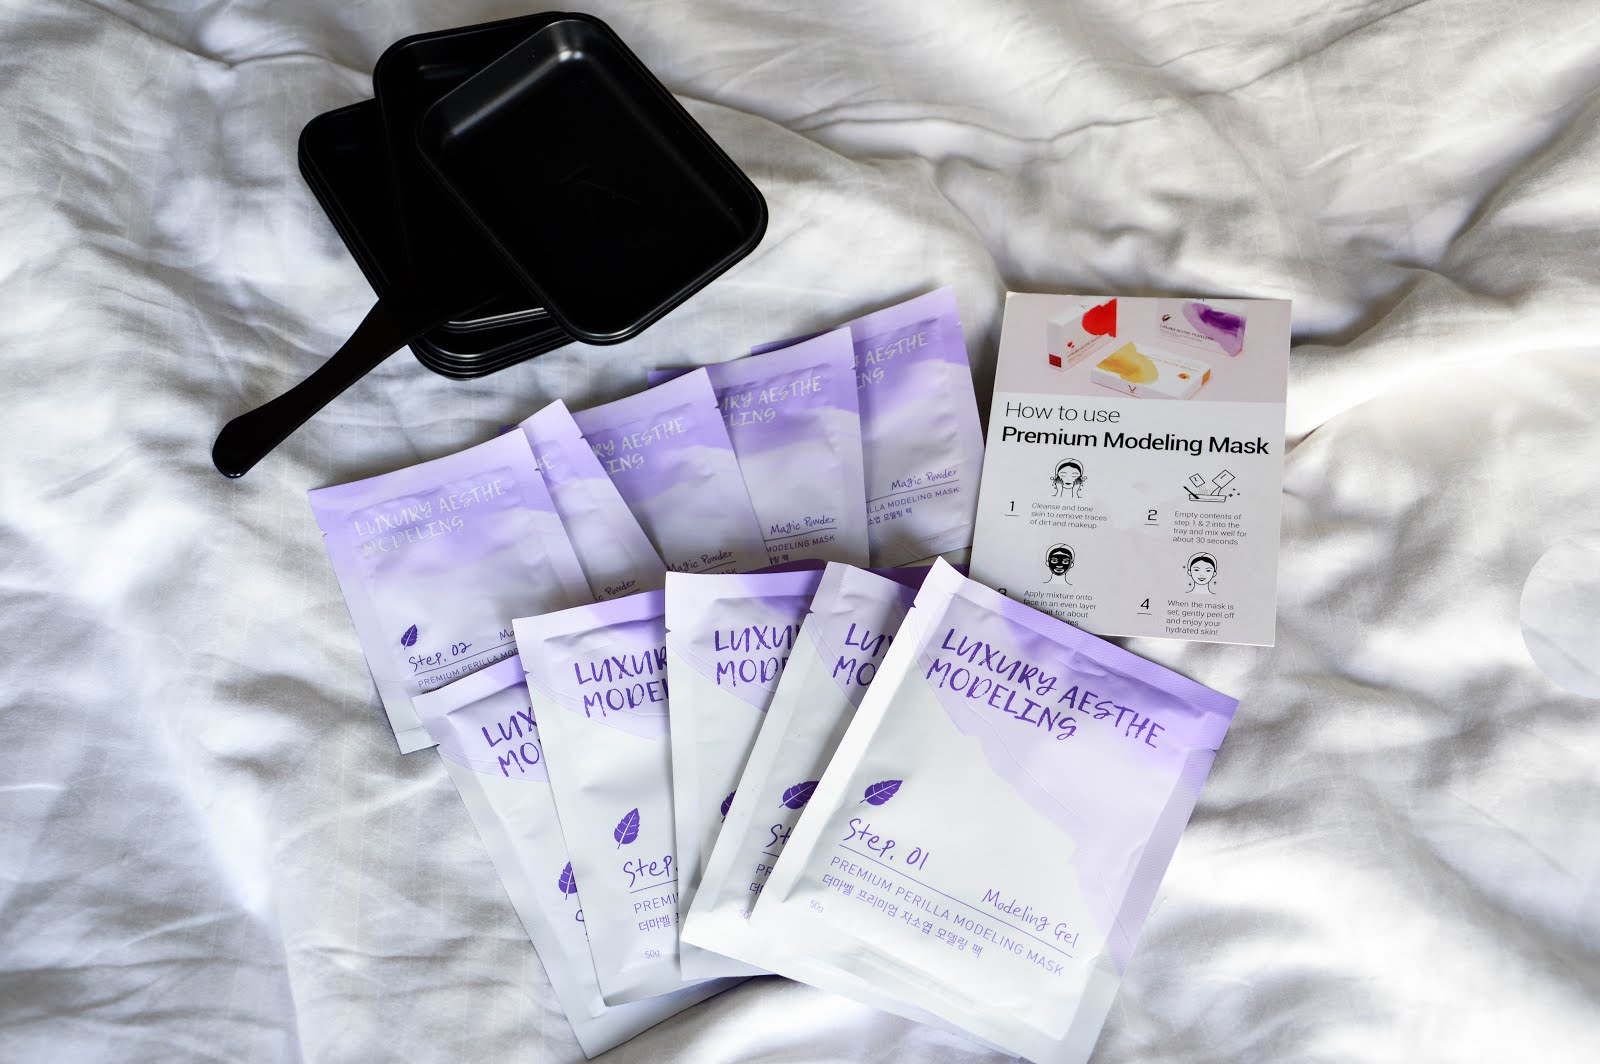 |REVIEW| Dermabell Perilla Premium Modeling Mask: Super Cooling